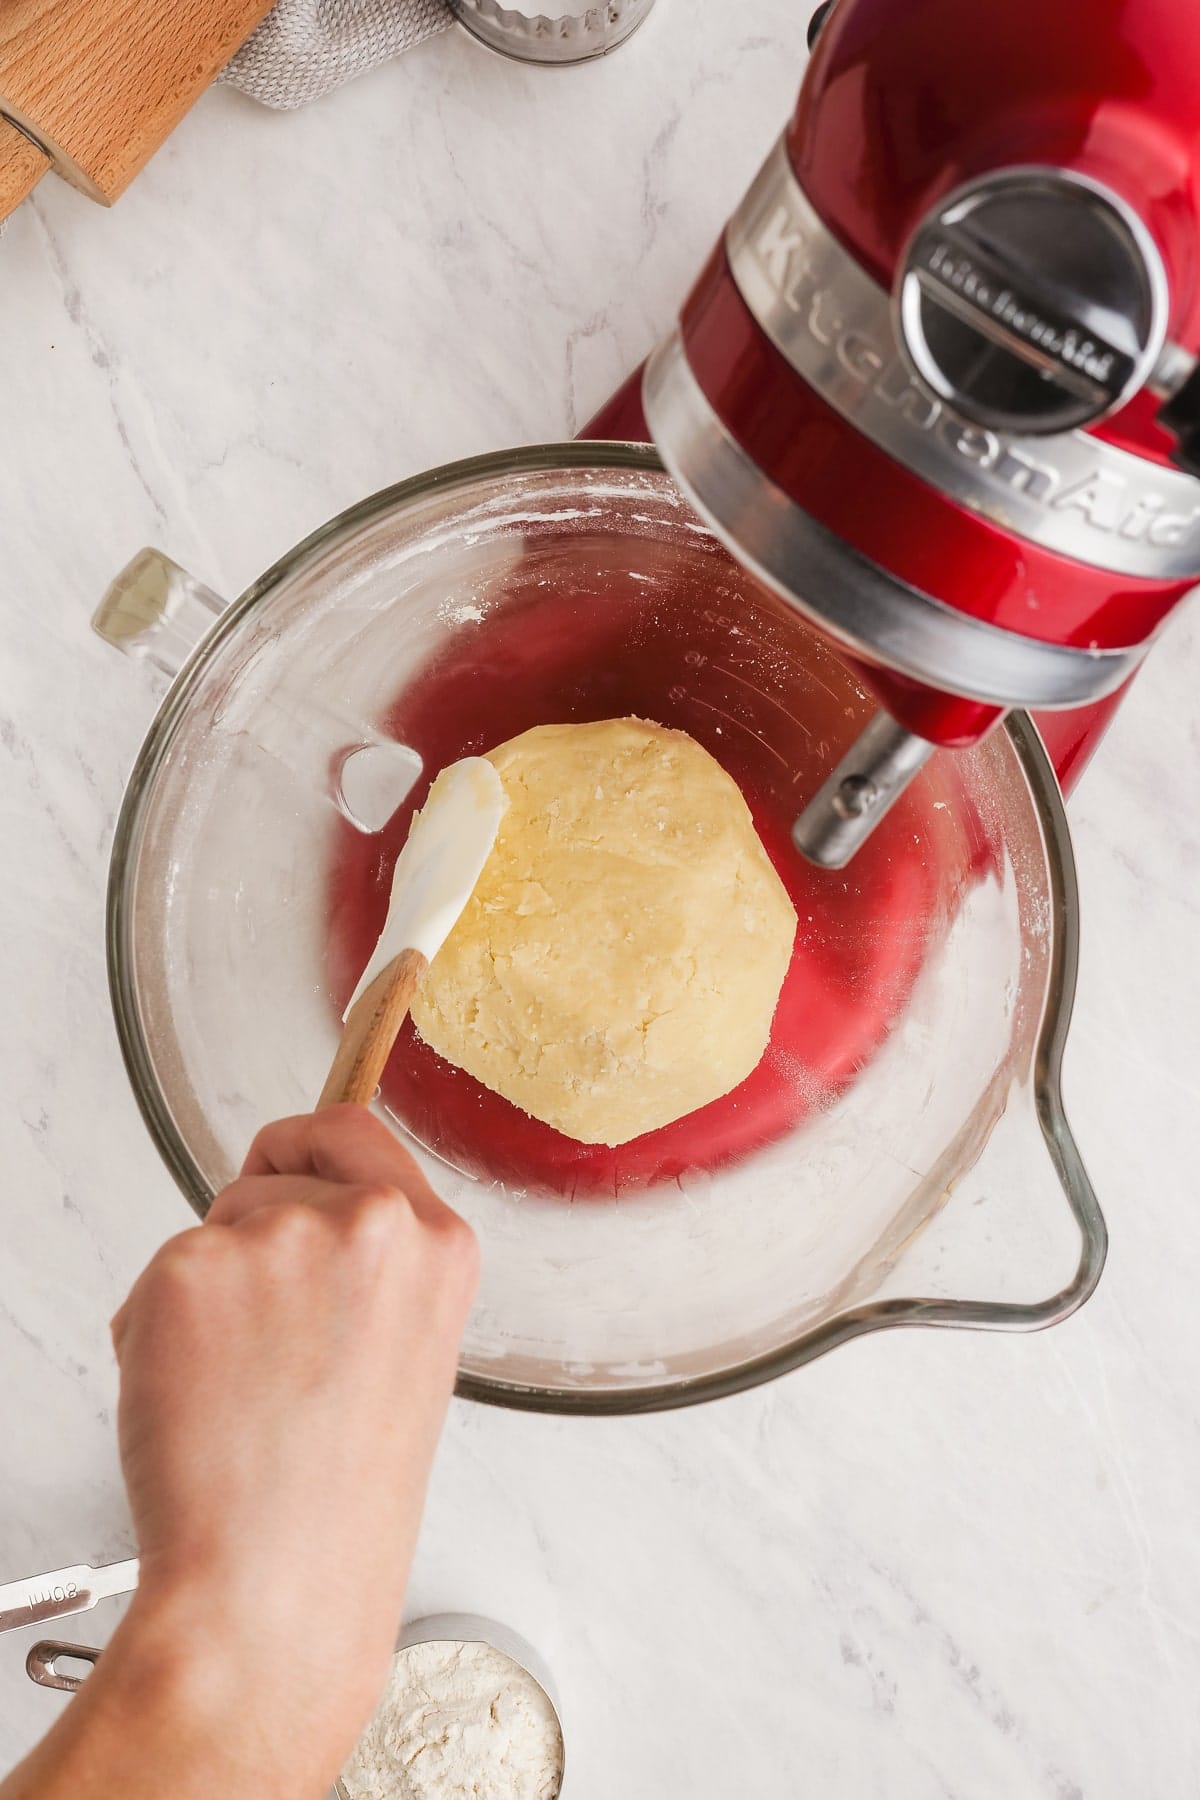 cookie dough being formed into ball with a rubber spatula while in a stand mixer bowl